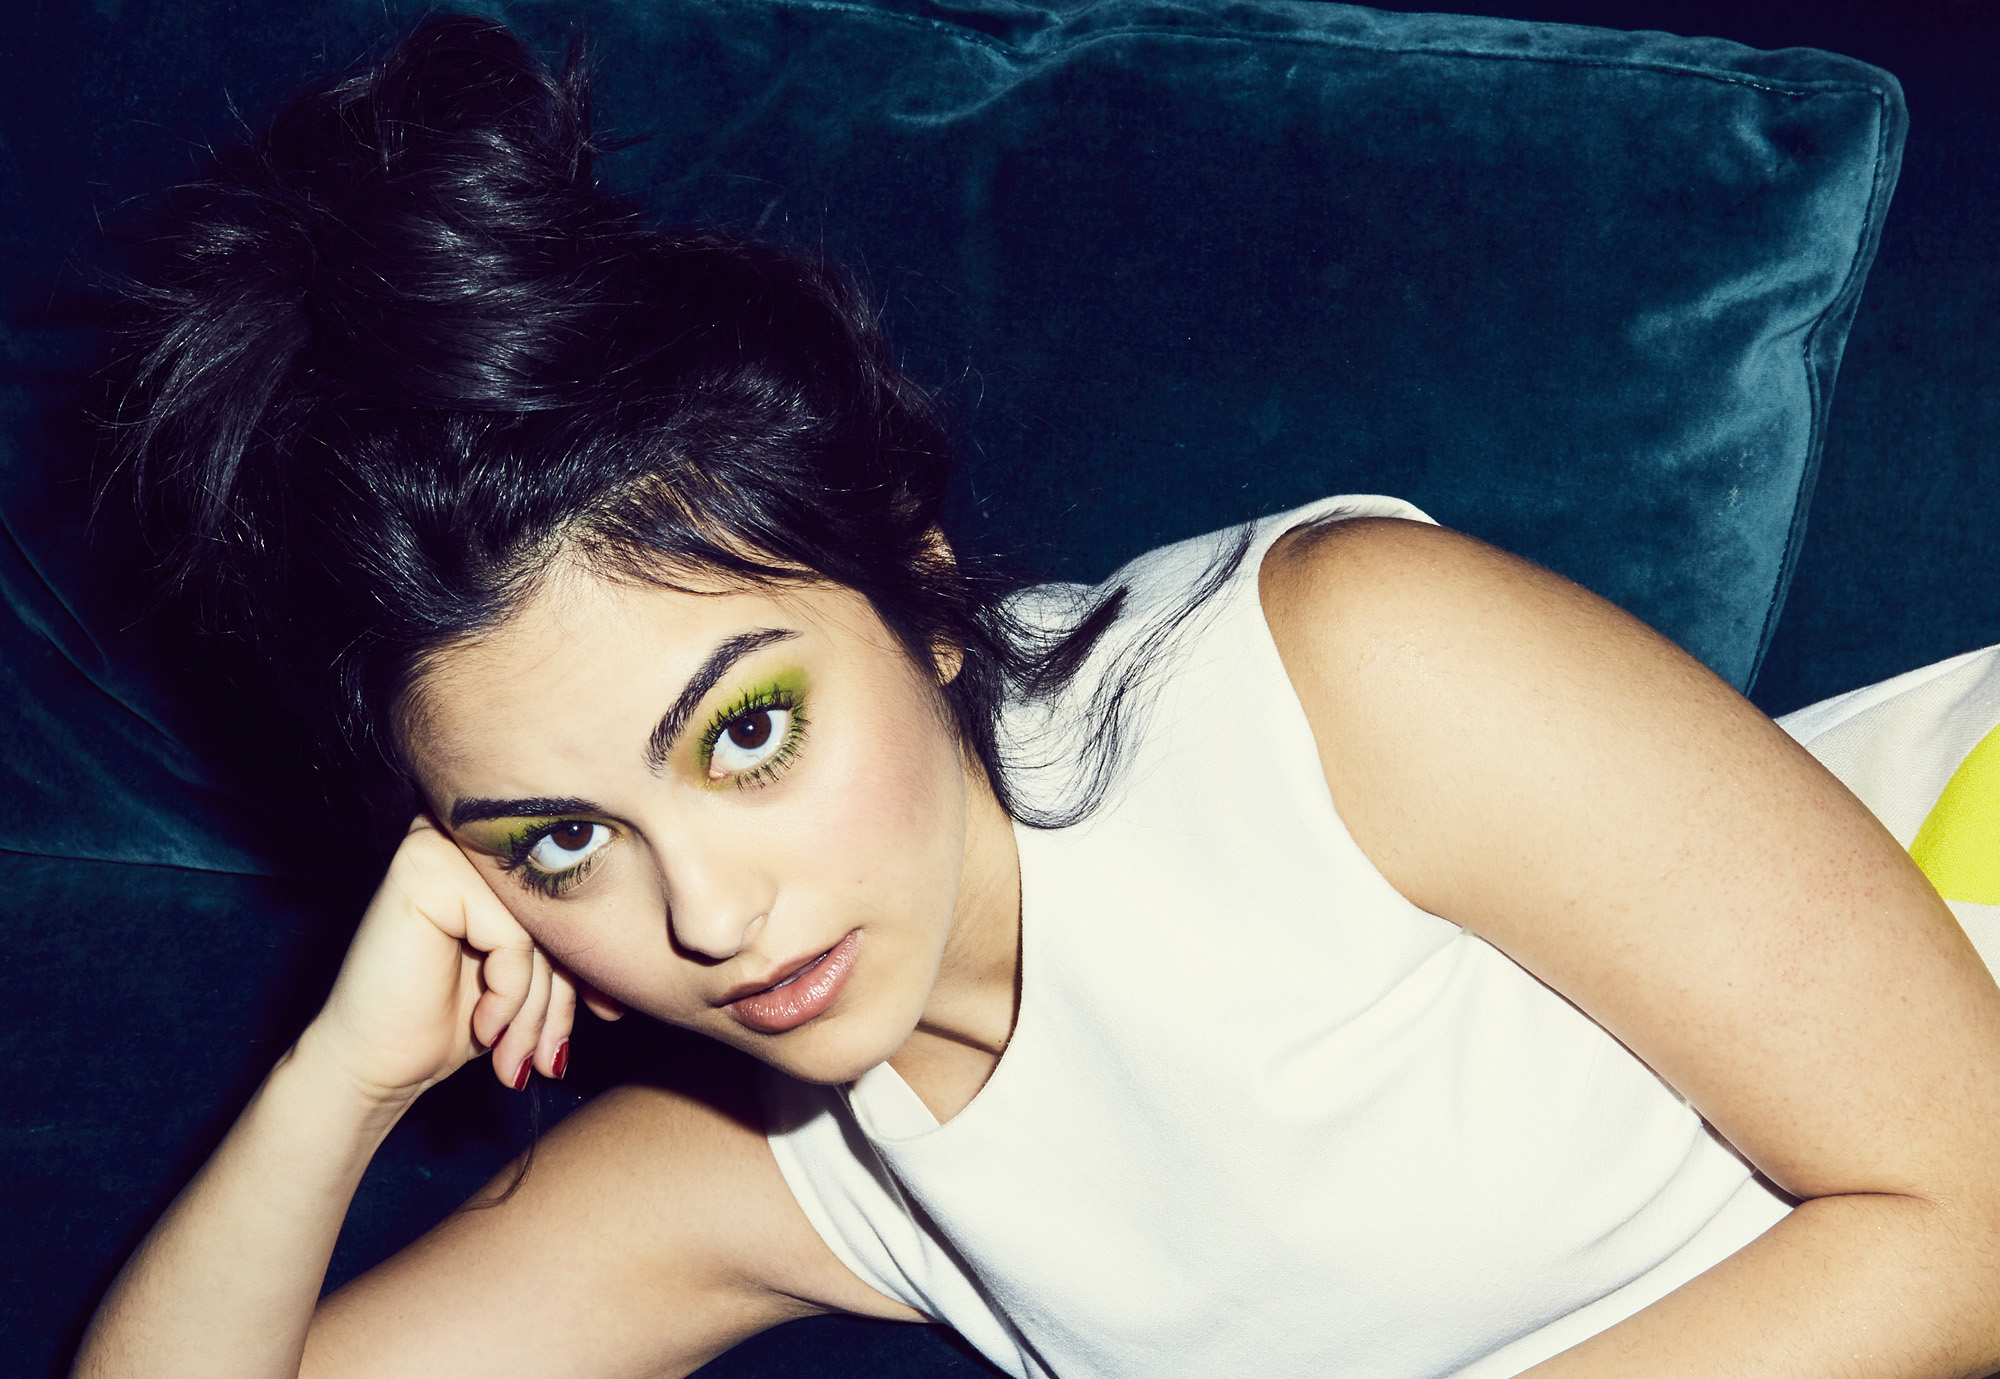 Get Up Close And Personal With RIVERDALE’s Veronica – Camila Mendes – In This Must-See New Photoshoot